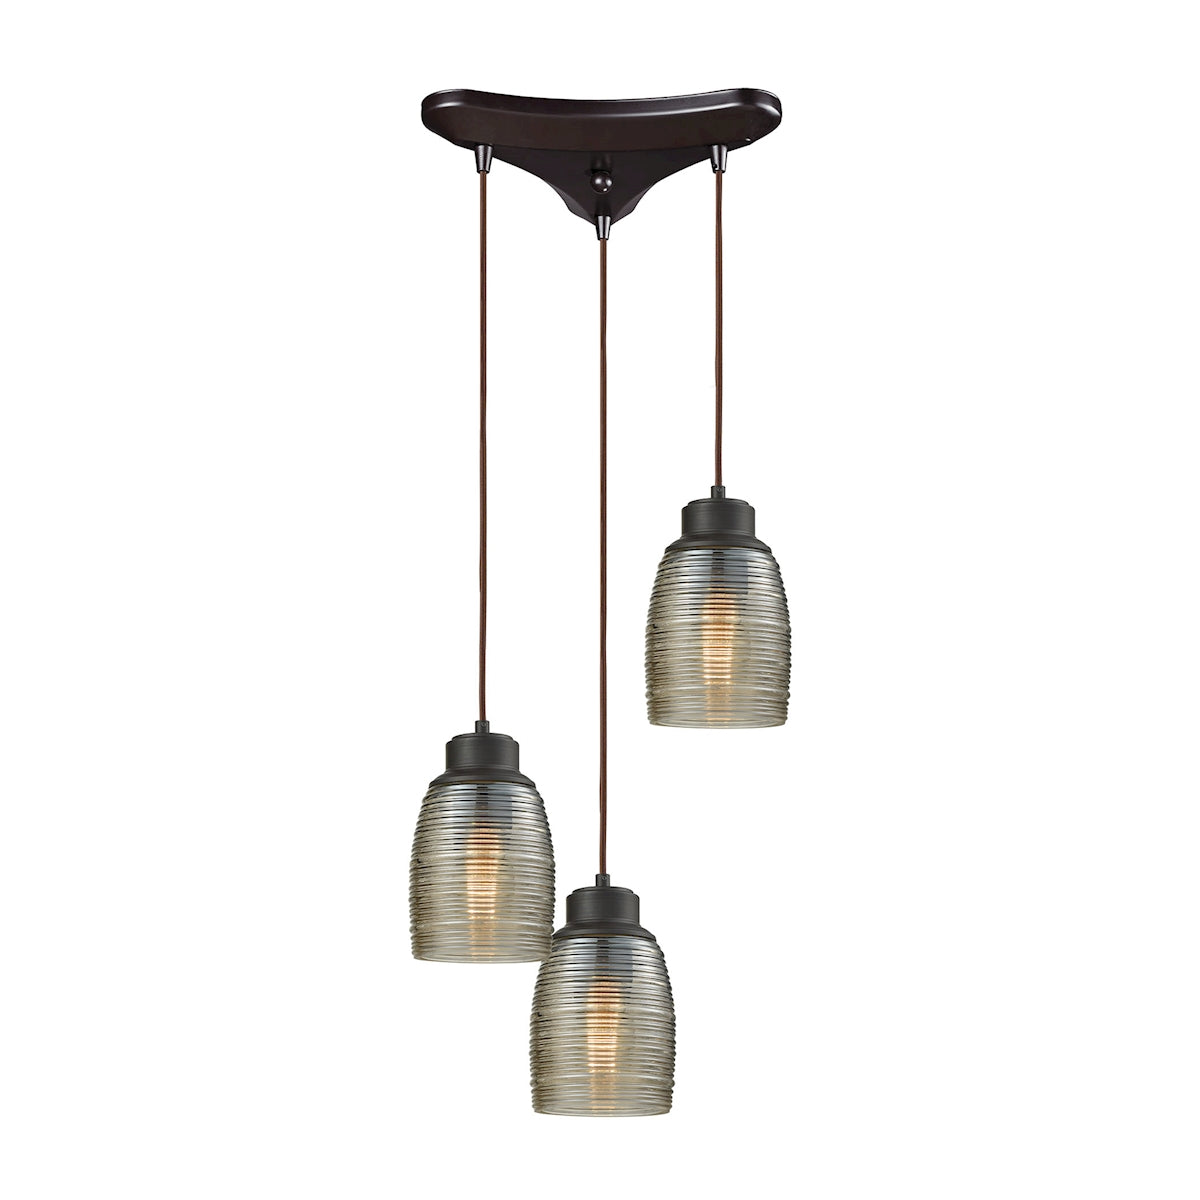 ELK Lighting 46216/3 Muncie 3-Light Triangular Pendant Fixture in Oil Rubbed Bronze with Champagne-plated Spun Glass